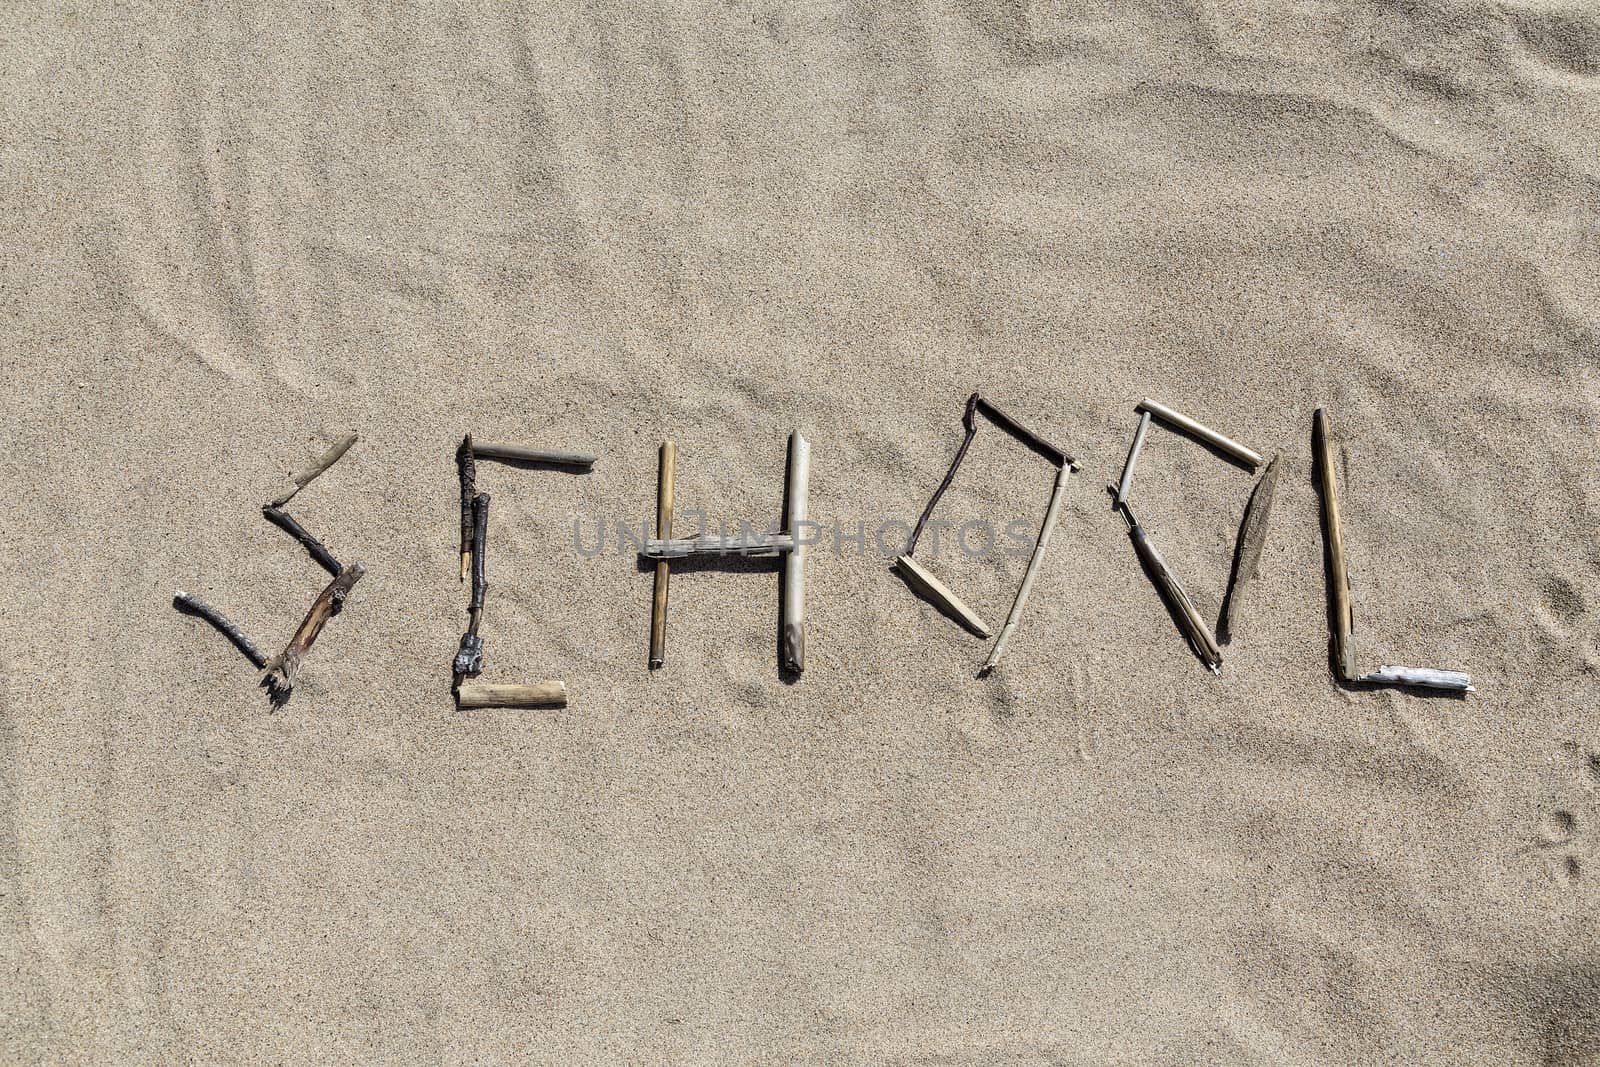 A set of sticks forming the word school in a sandy beach use it for background